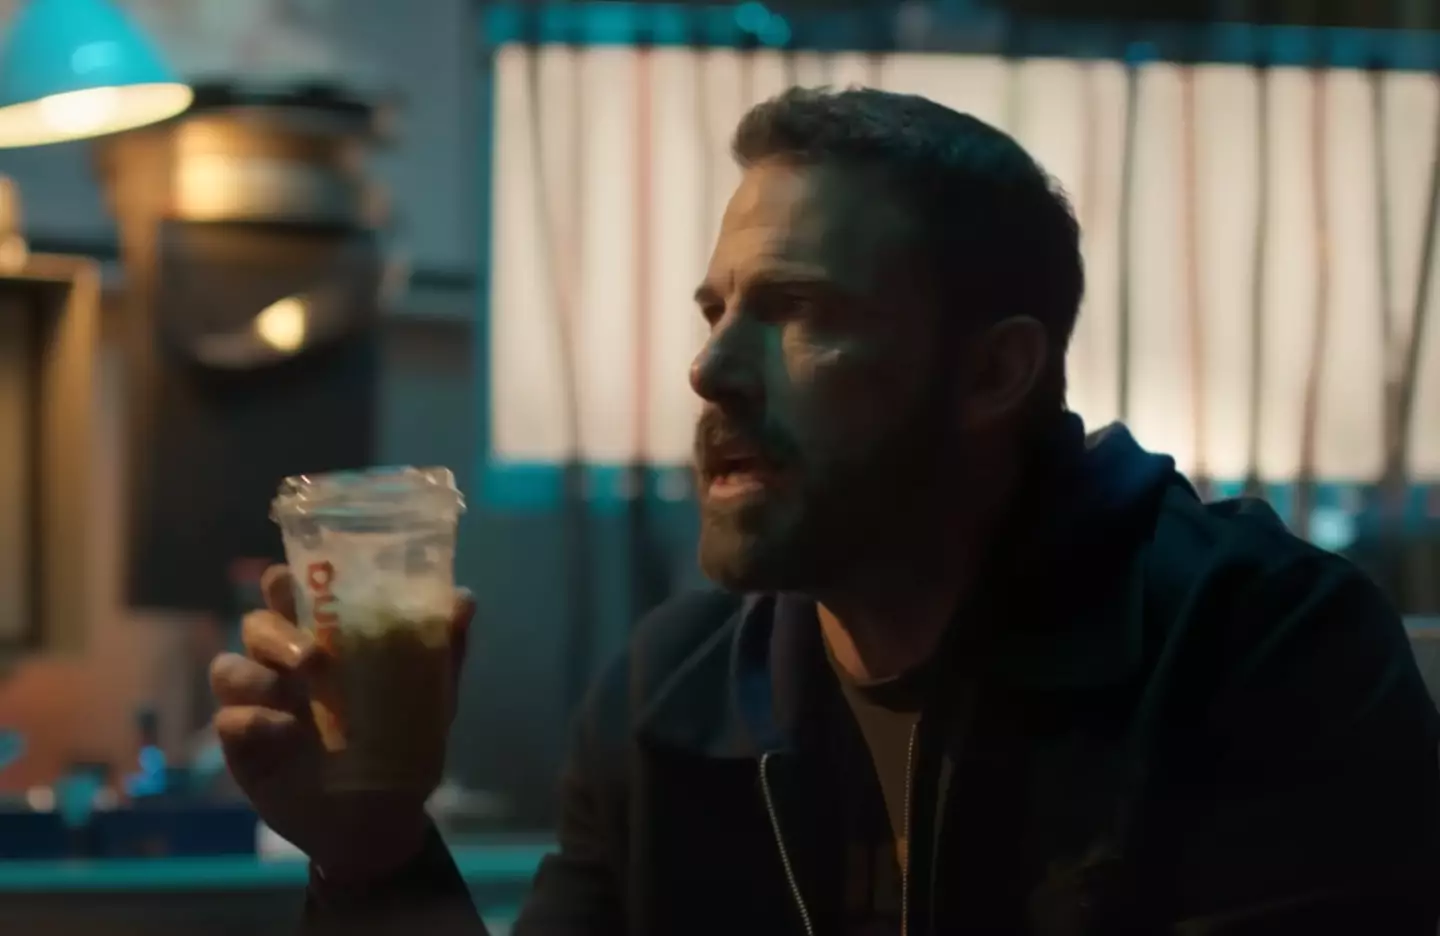 Designing a brilliant Super Bowl commercial is likely a daunting task but fans loved the Dunkin’ ad.